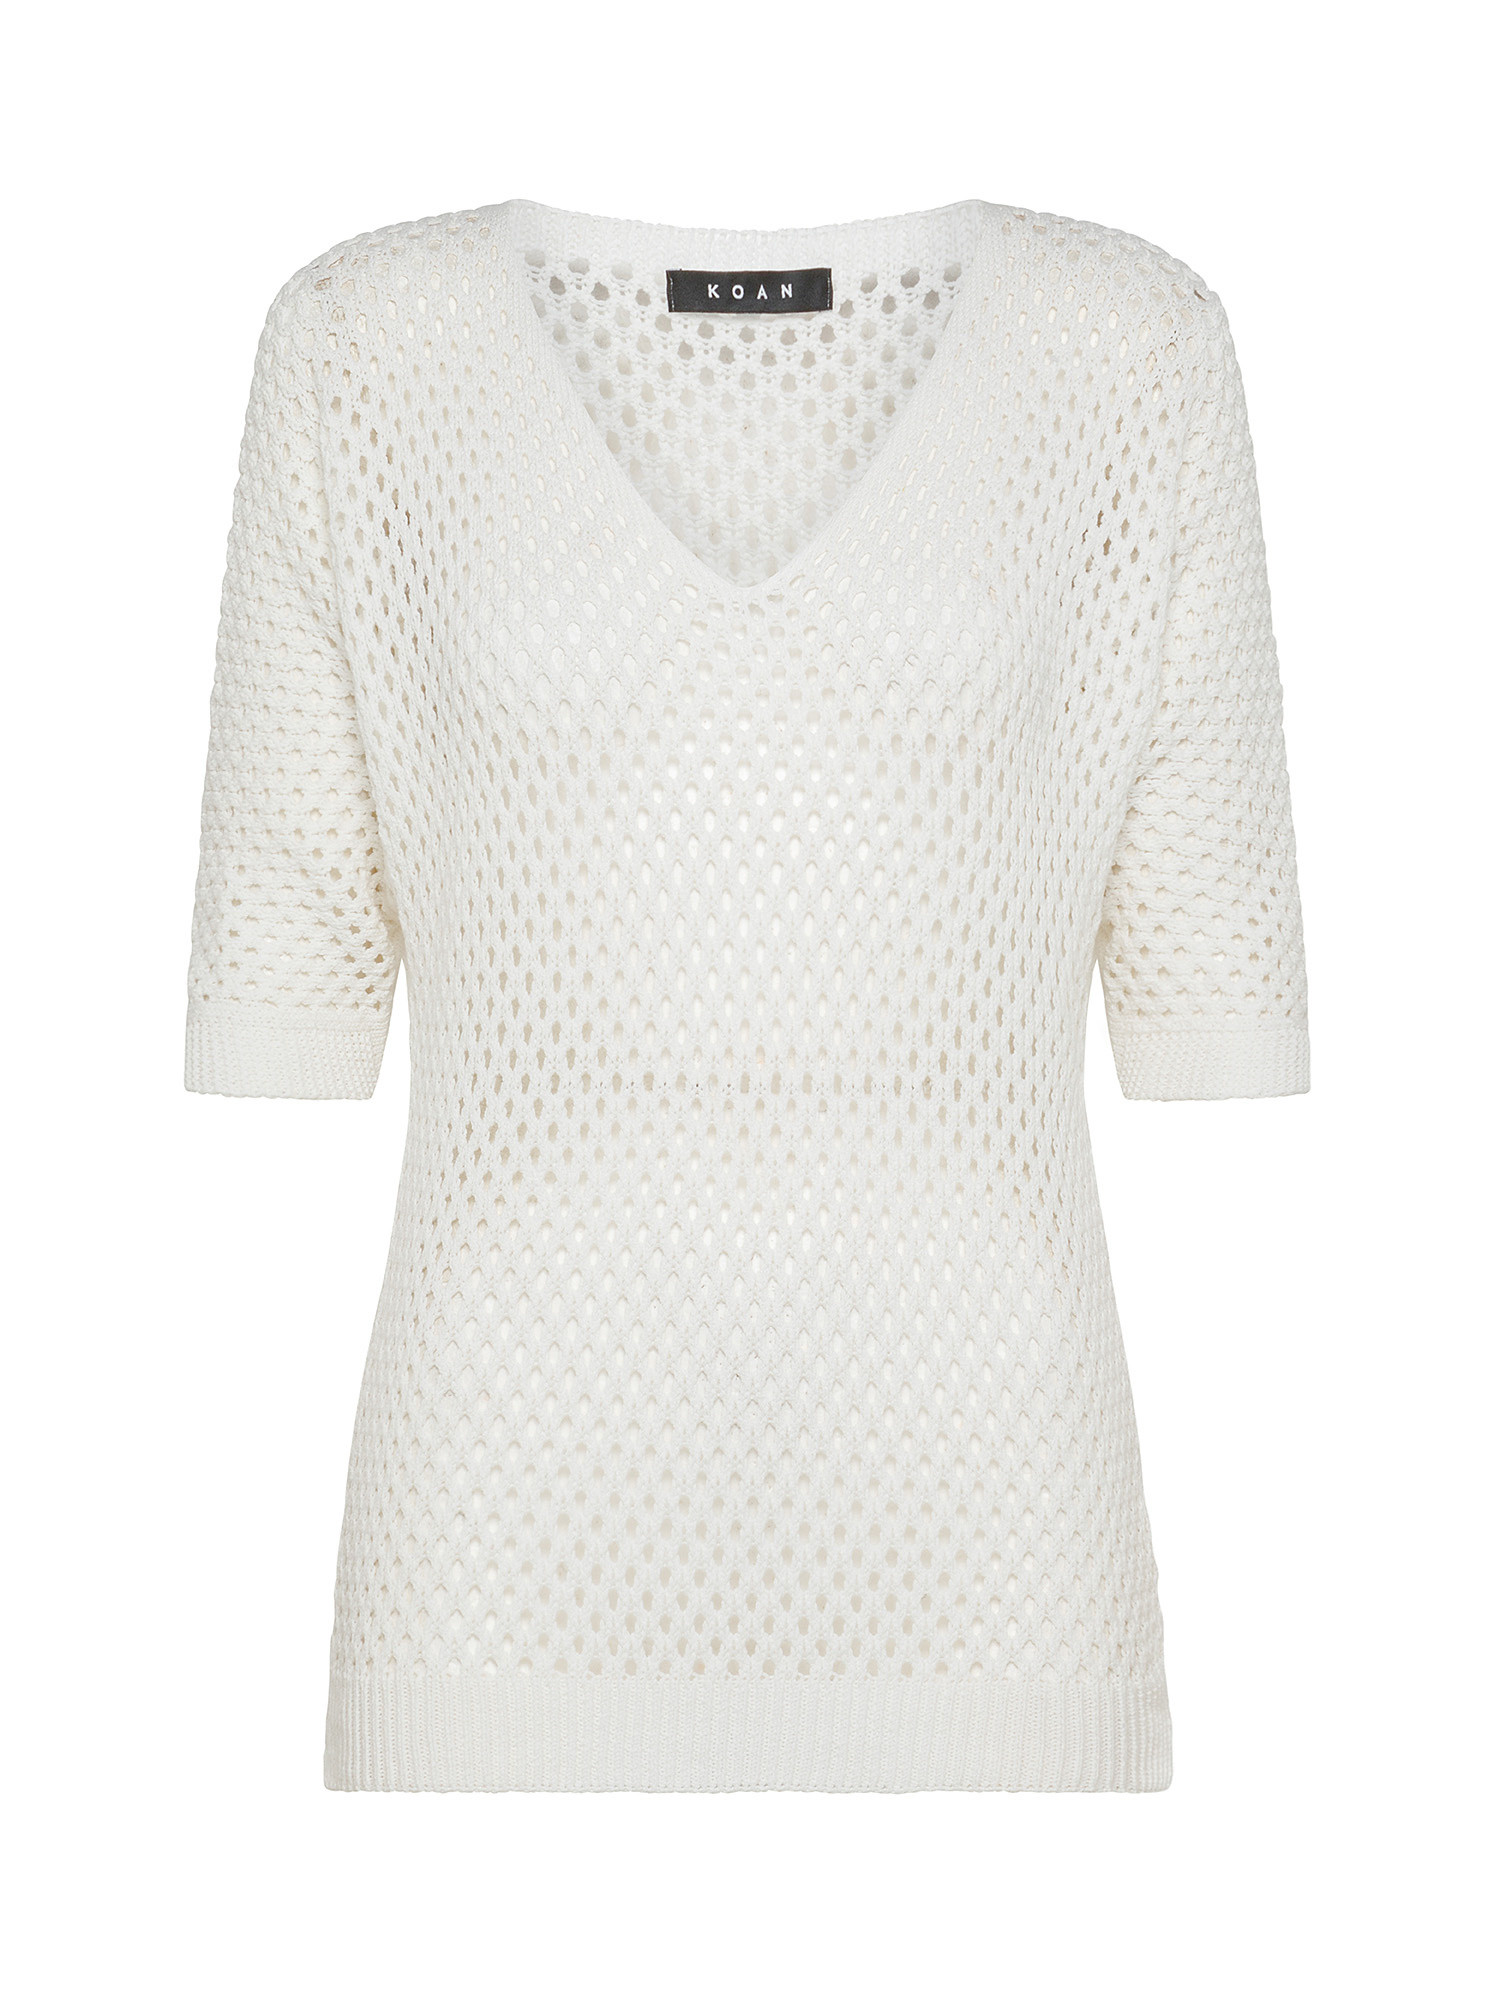 Perforated tricot sweater, White, large image number 0